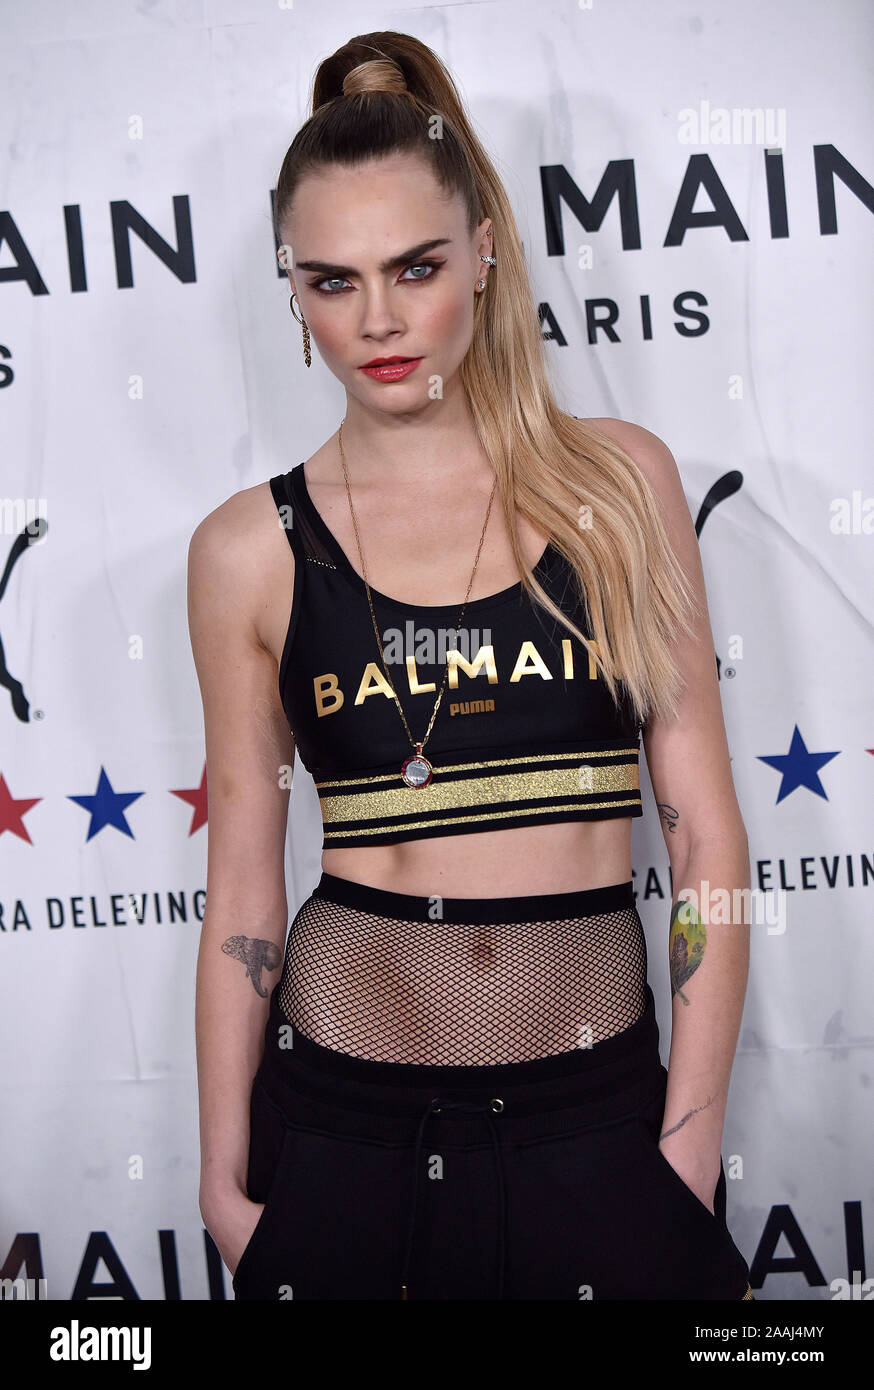 Los Angeles, United States. 22nd Nov, 2019. Cara Delevingne arrives for the  launch party celebrating her fashion collection collaboration with Puma and  Balmain at Milk Studios in Los Angeles, California on Thursday,